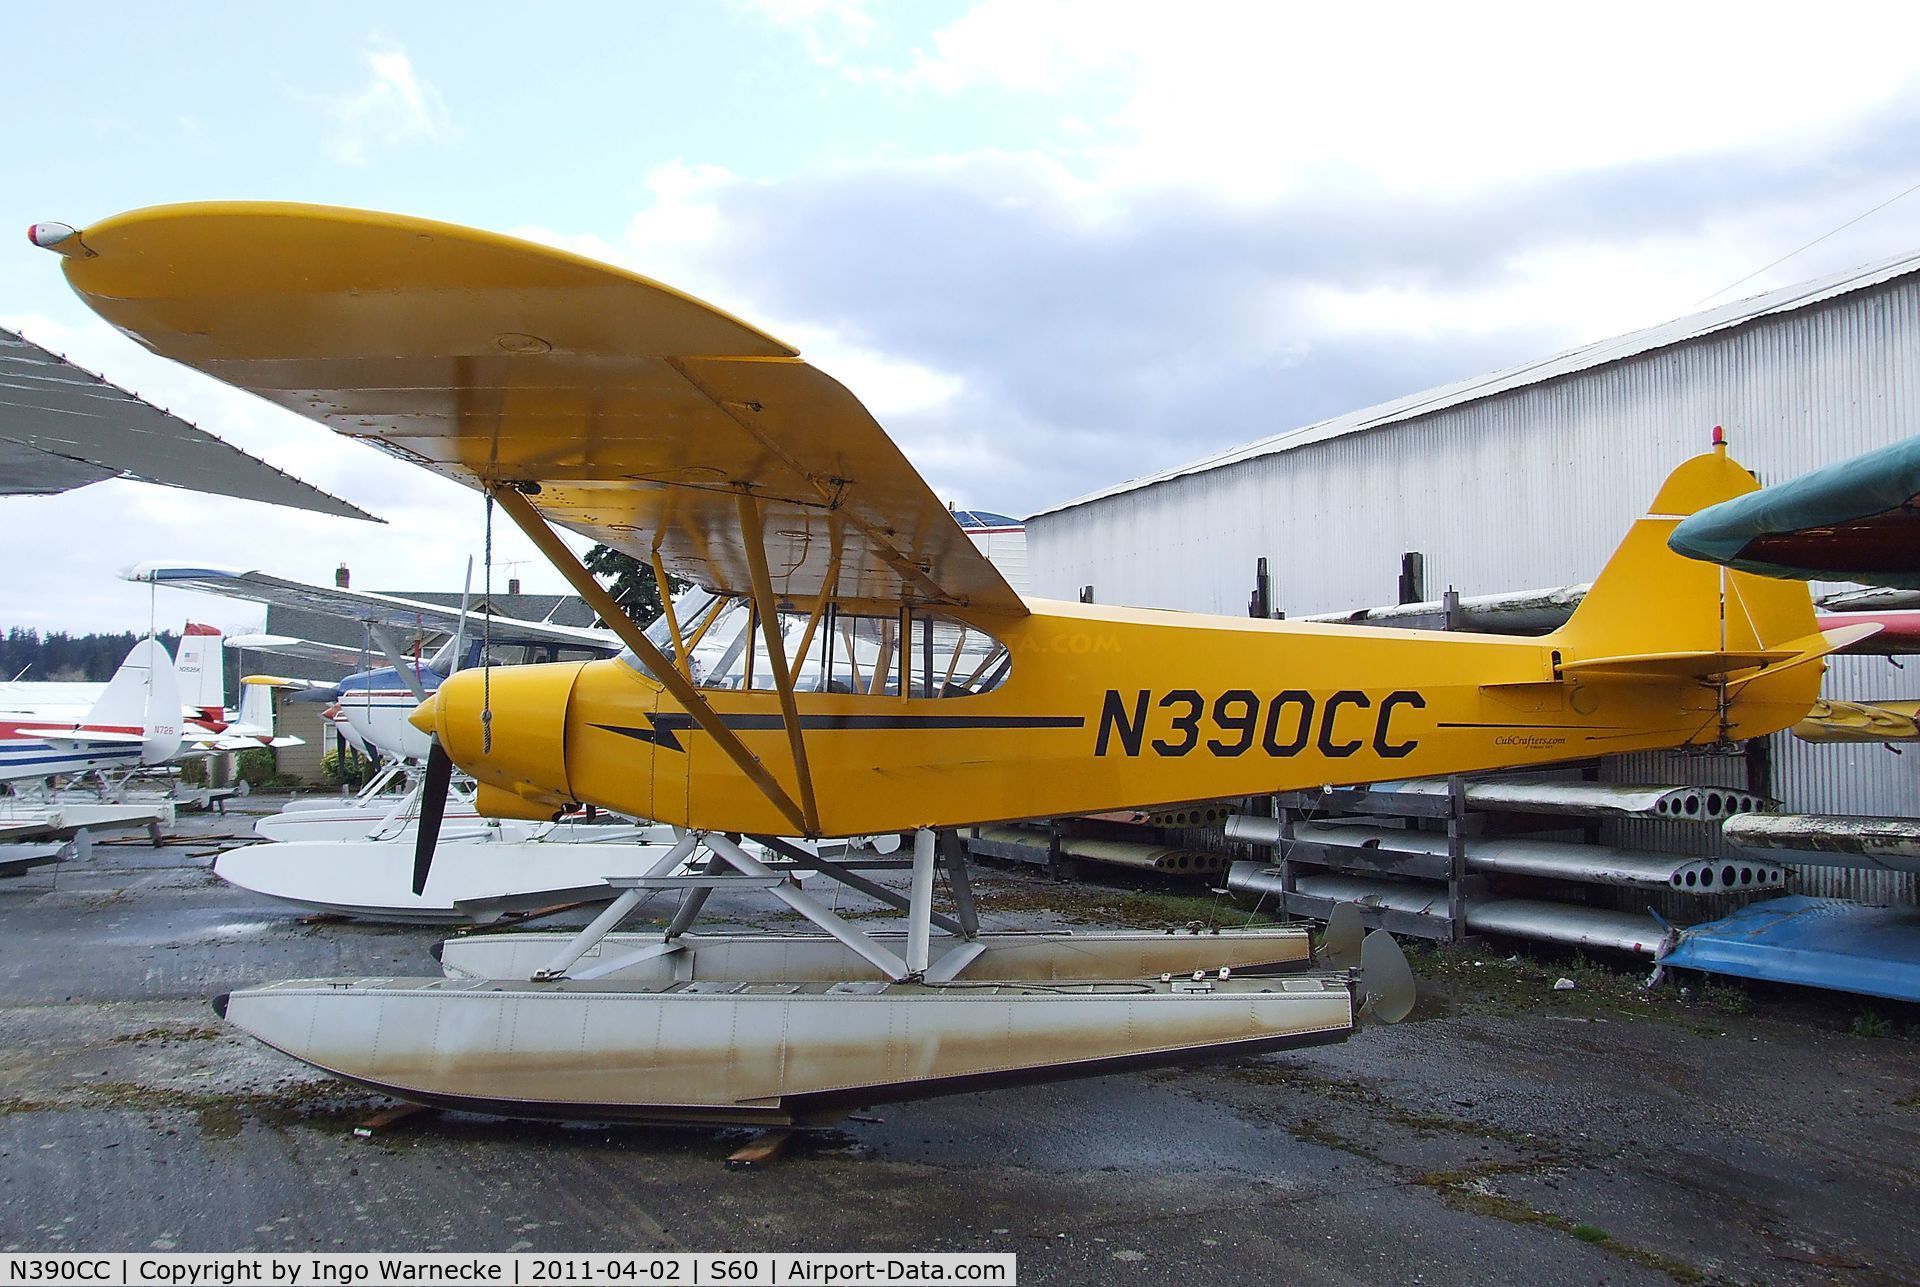 N390CC, 2002 Piper/cub Crafters PA-18-150 C/N 9944CC, Piper/Cub Crafters PA-18-150 Top Cub on floats at Kenmore Air Harbor, Kenmore WA